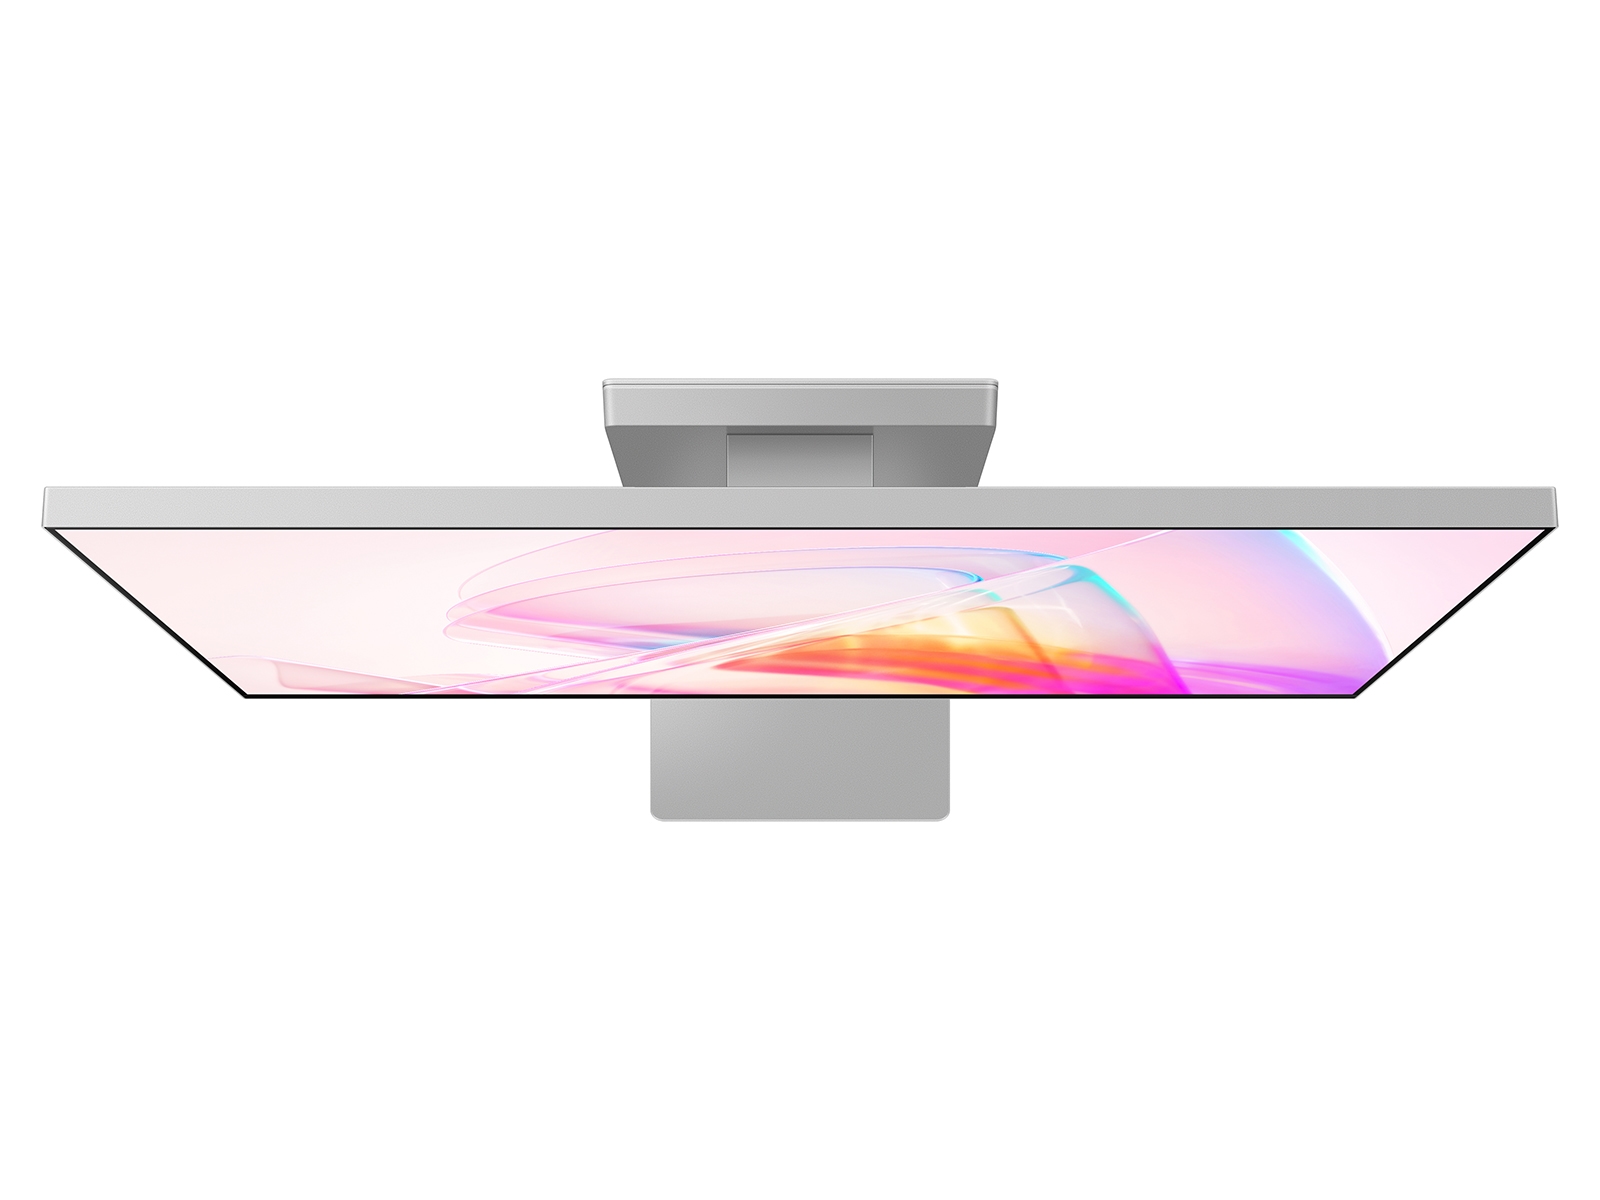 Thumbnail image of 27” ViewFinity S9 5K IPS Smart Monitor with Matte Display, Ergonomic Stand and SlimFit Camera